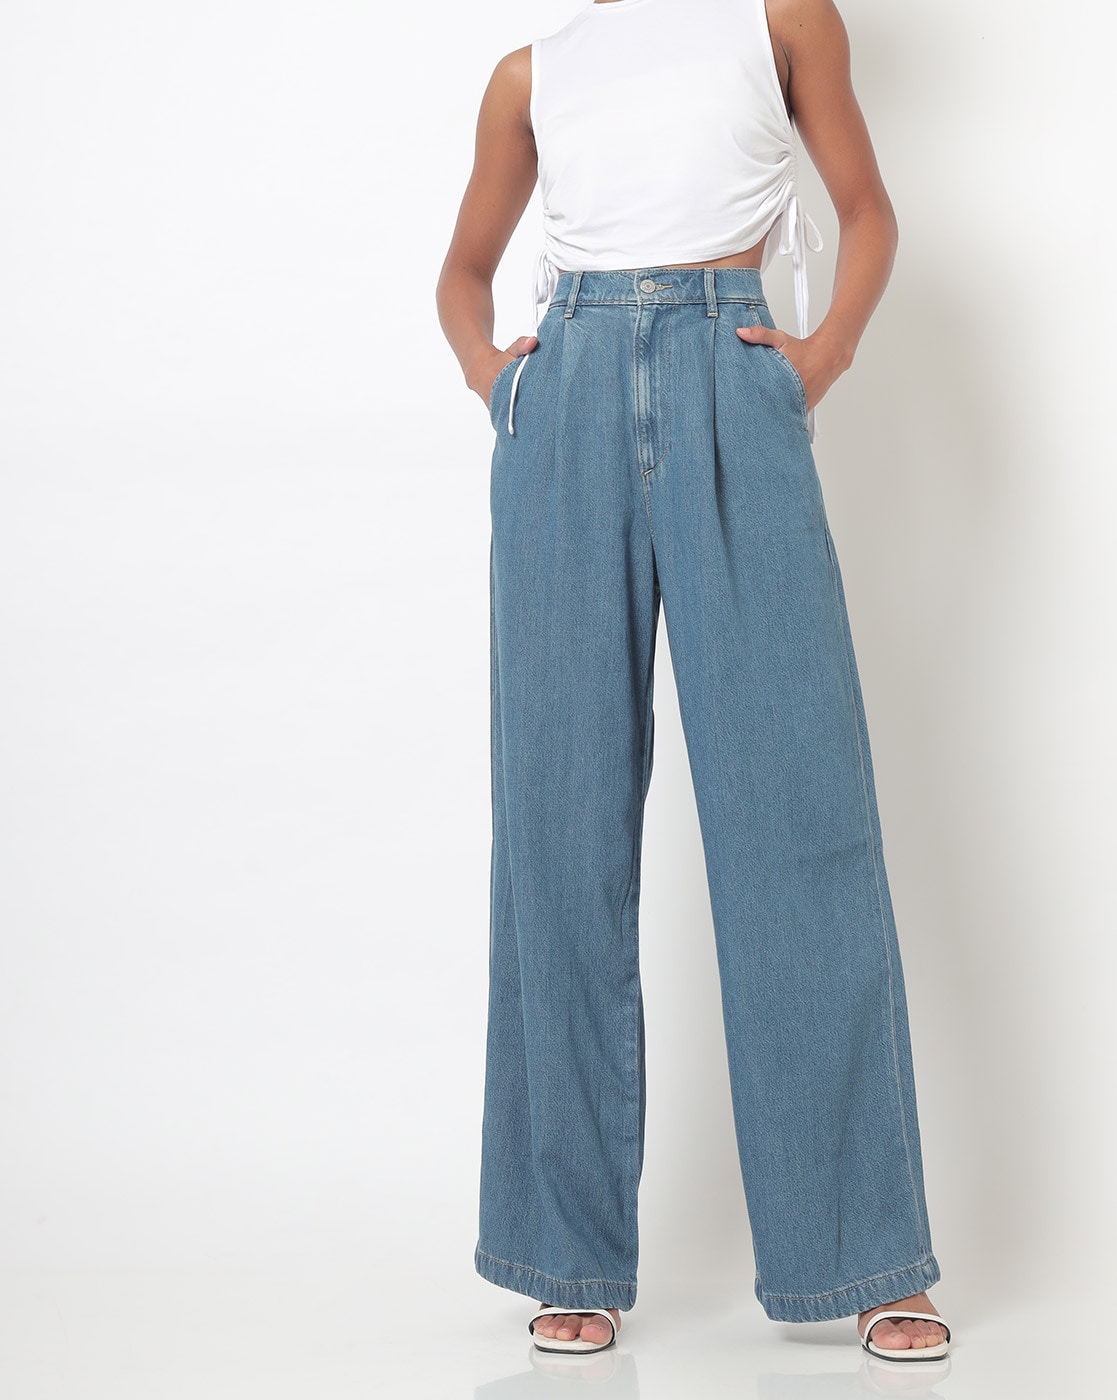 Buy Women's Jeans: High Waisted to Baggy Jeans | Levi's® MY